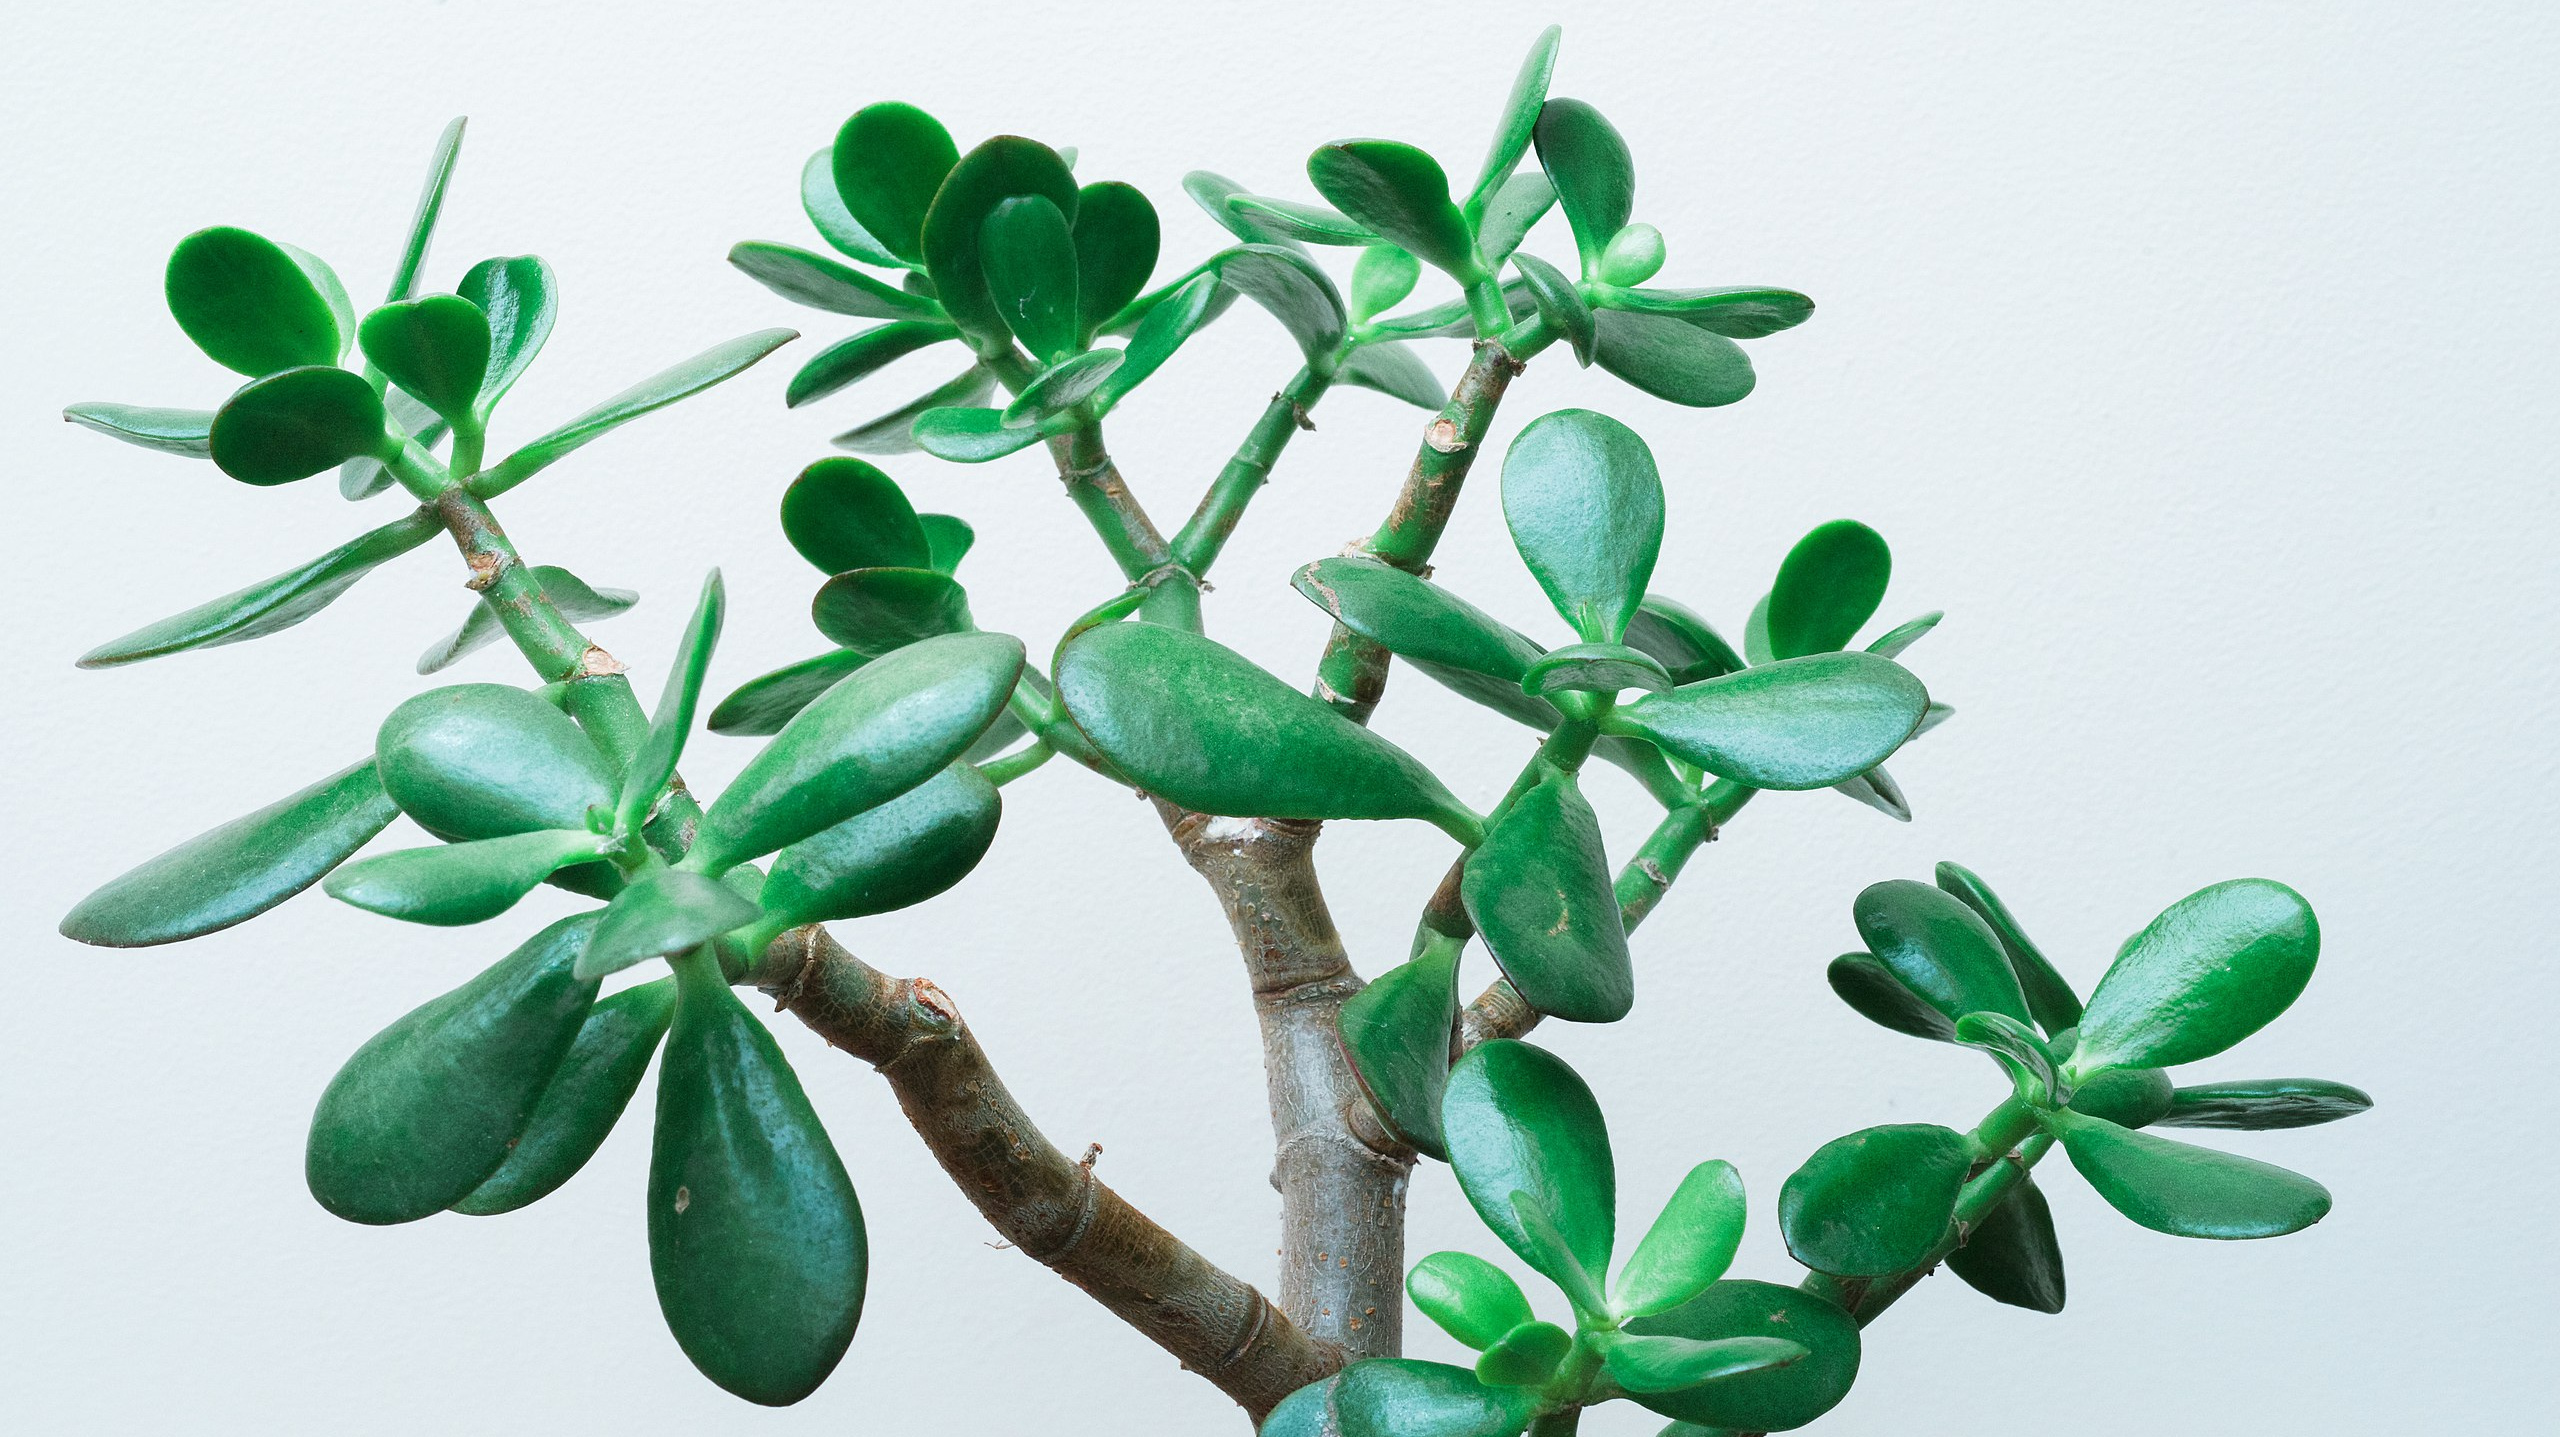 Leaves and woody stalks of a jade plant against white background